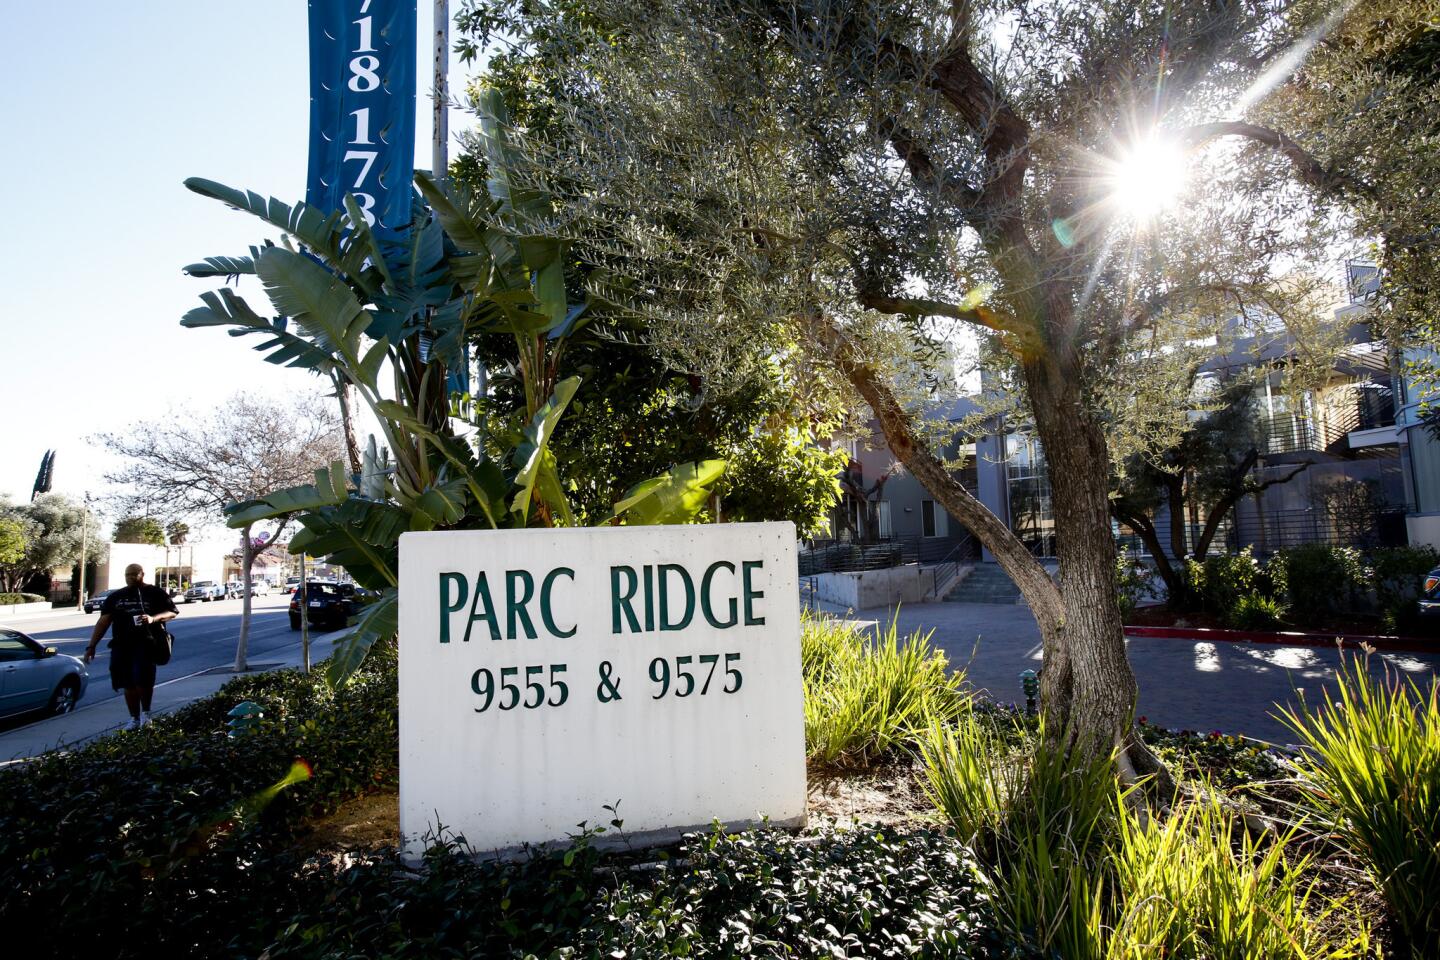 Parc Ridge Apartments, at 9555 and 9575 Reseda Blvd. in Northridge, was built on the site of the Northridge Meadows apartment complex, where 16 people died in the 1994 earthquake.